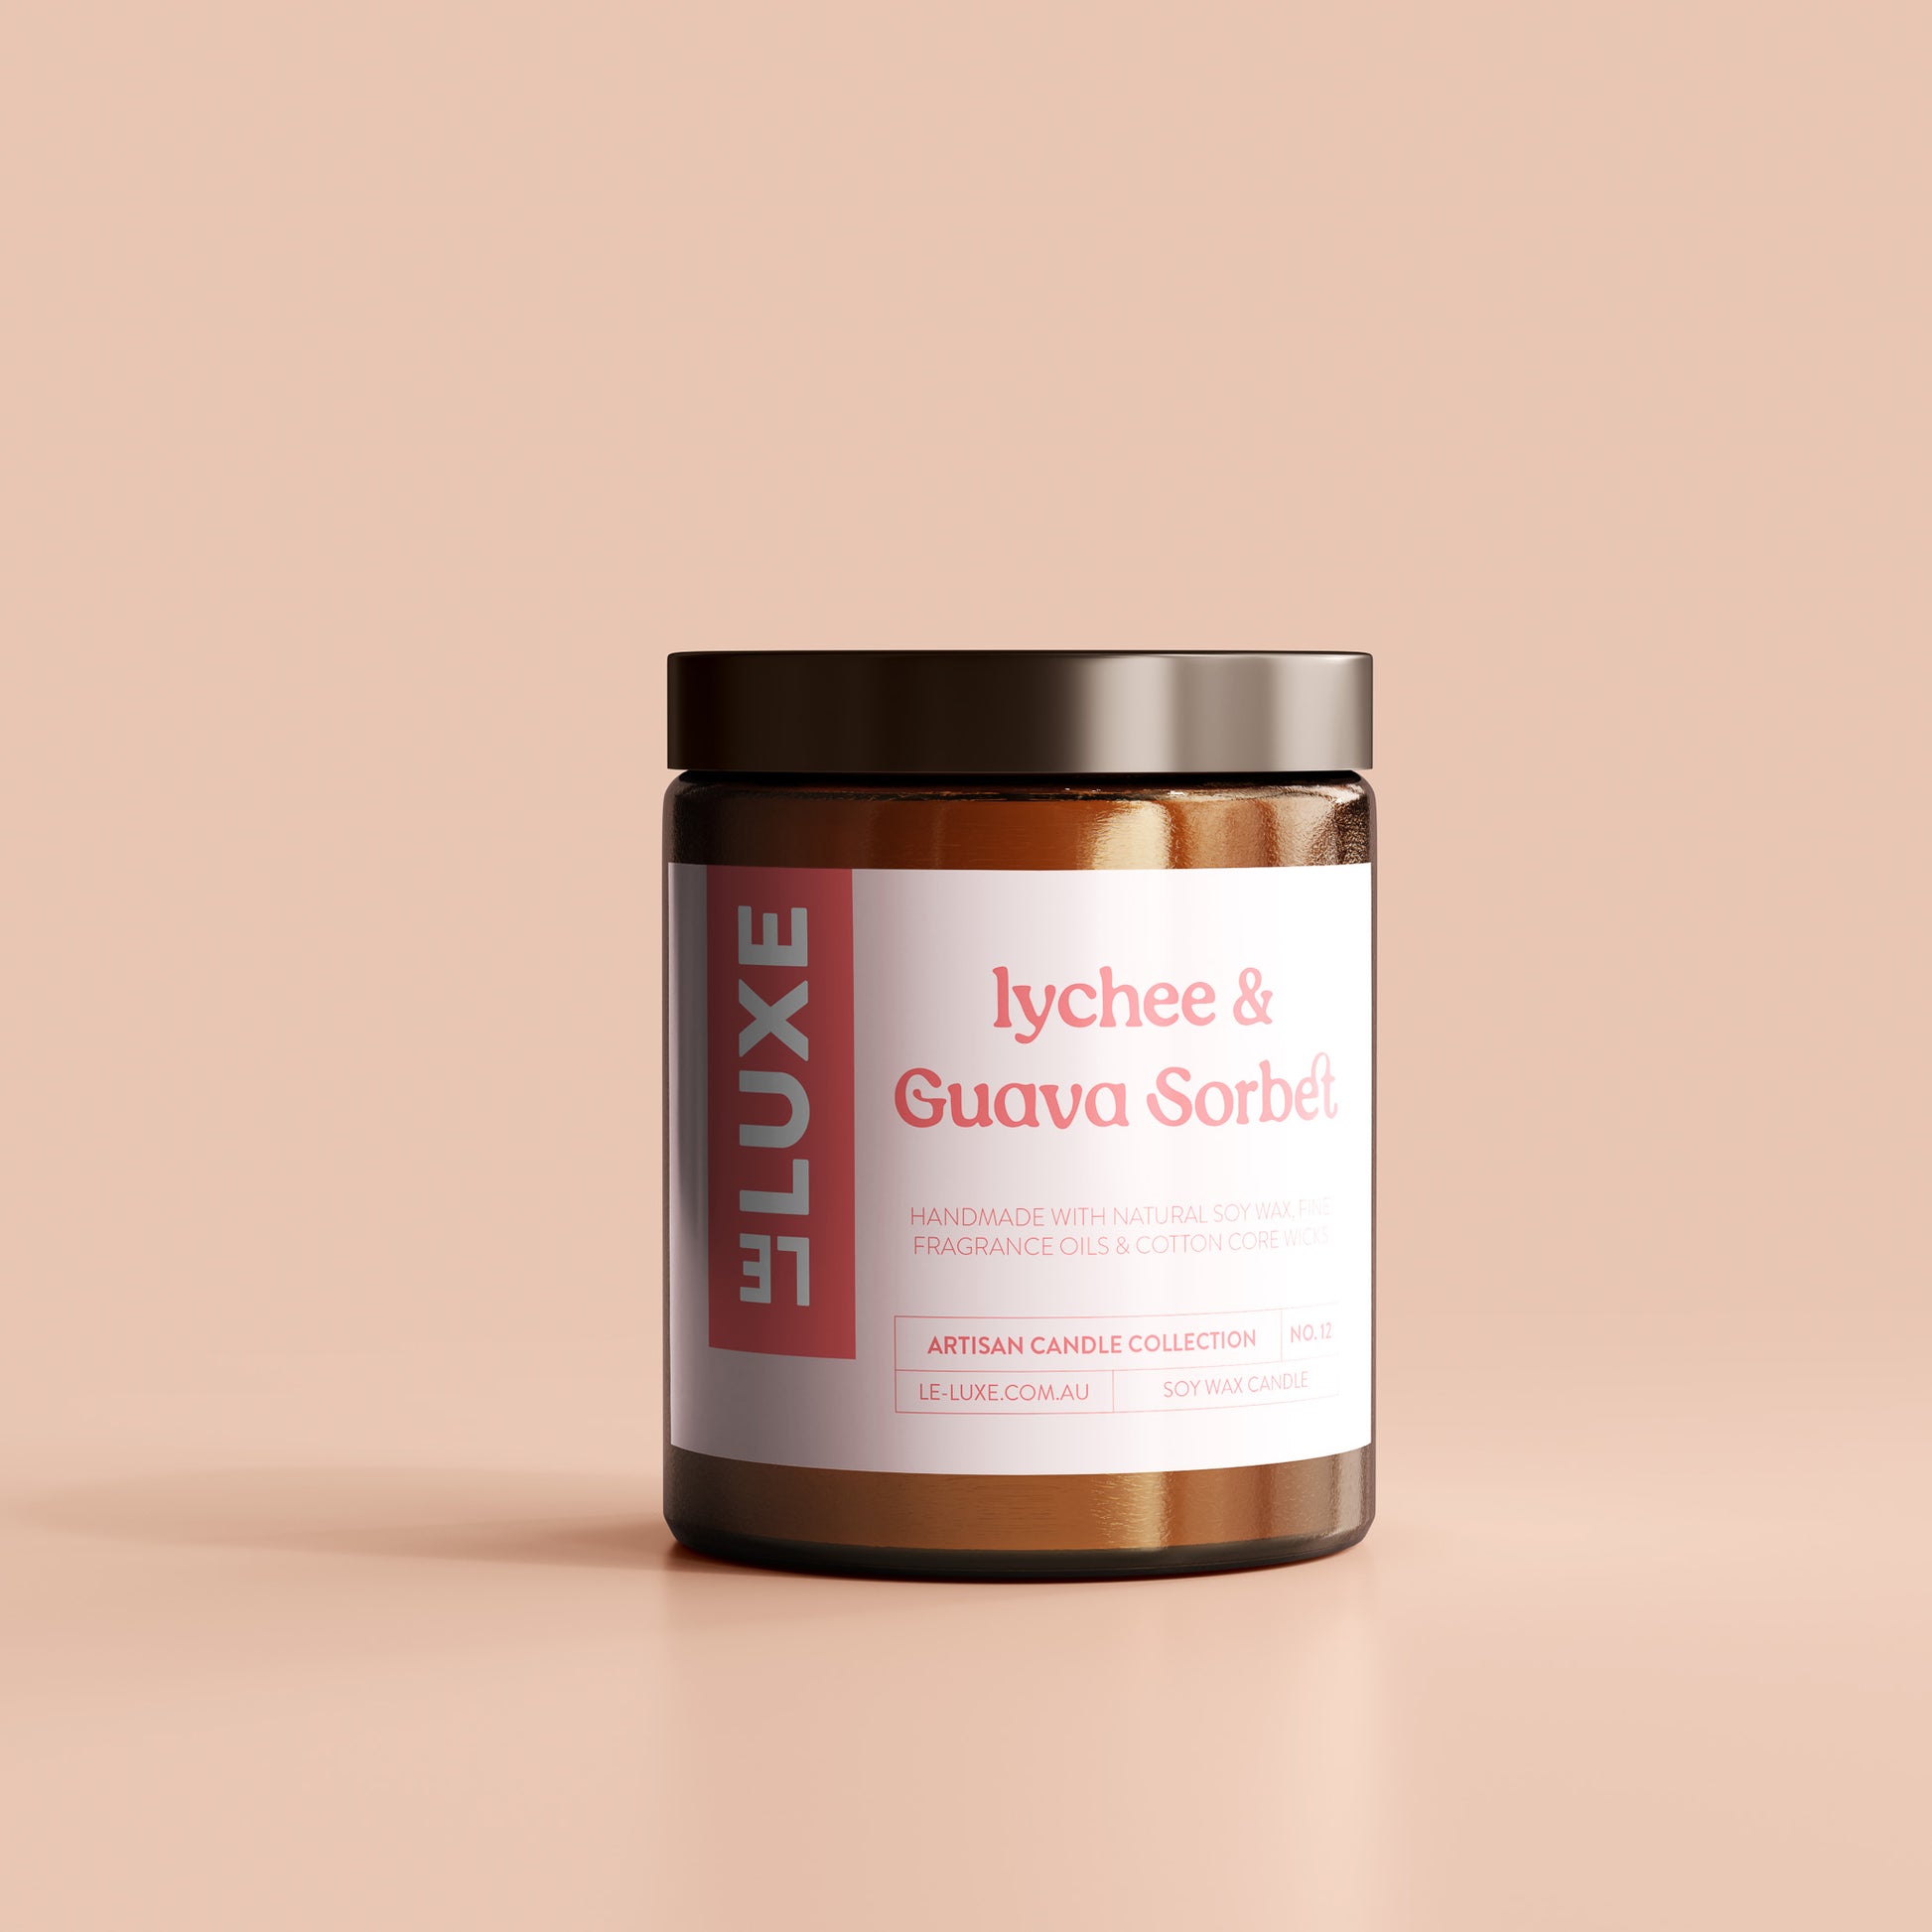 Le Luxe Soy Wax Candle - Lychee & Guava Sorbet